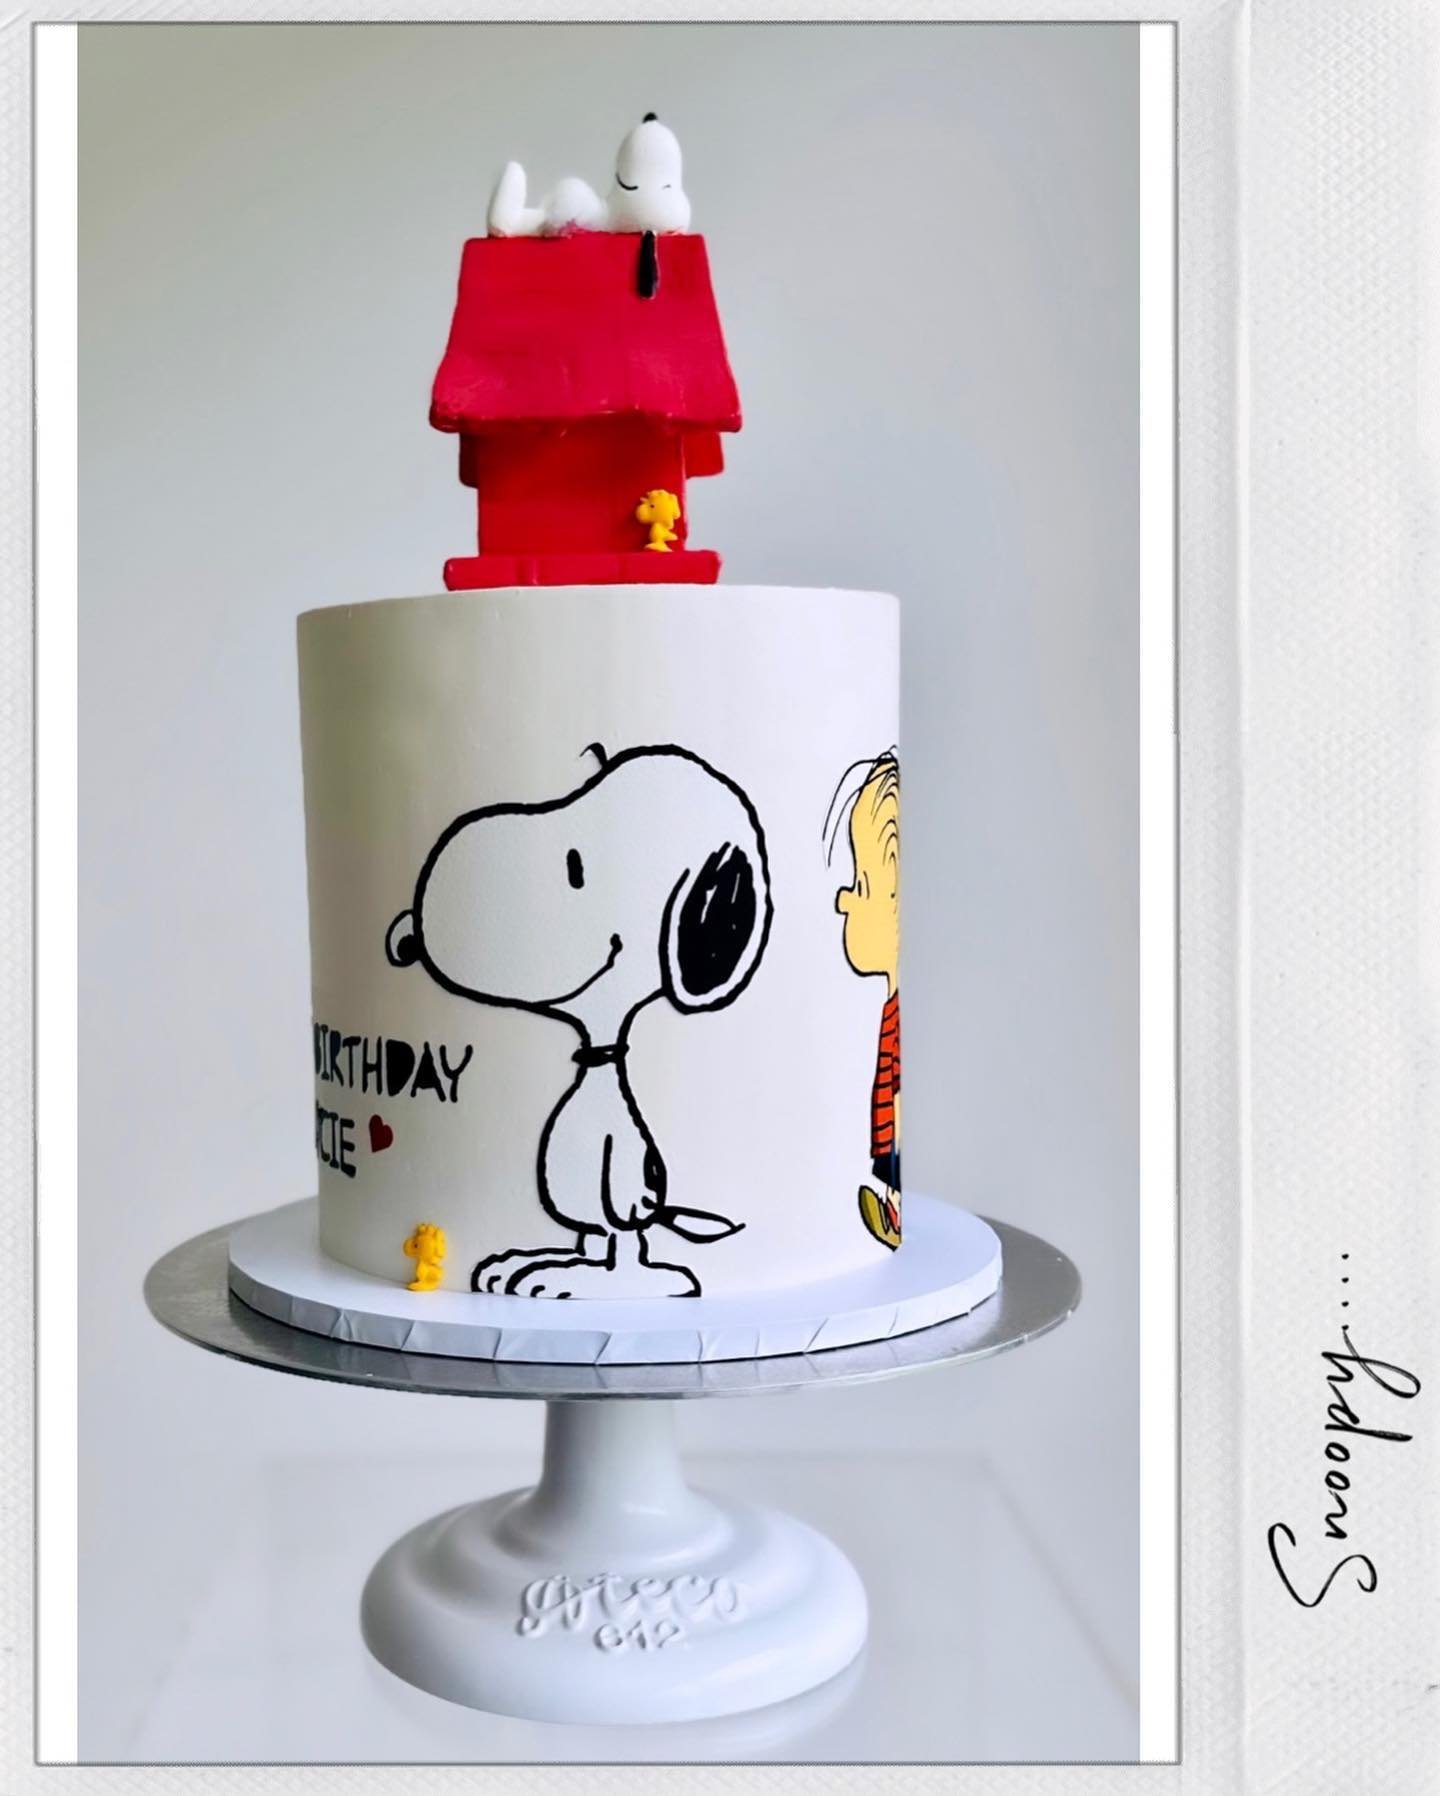 &ldquo;Life is better when you have a friend like Snoopy!&rdquo; Happy Birthday Lucie 9 already!! #snoopycake #itsnotjustcake #londoncakedesigner